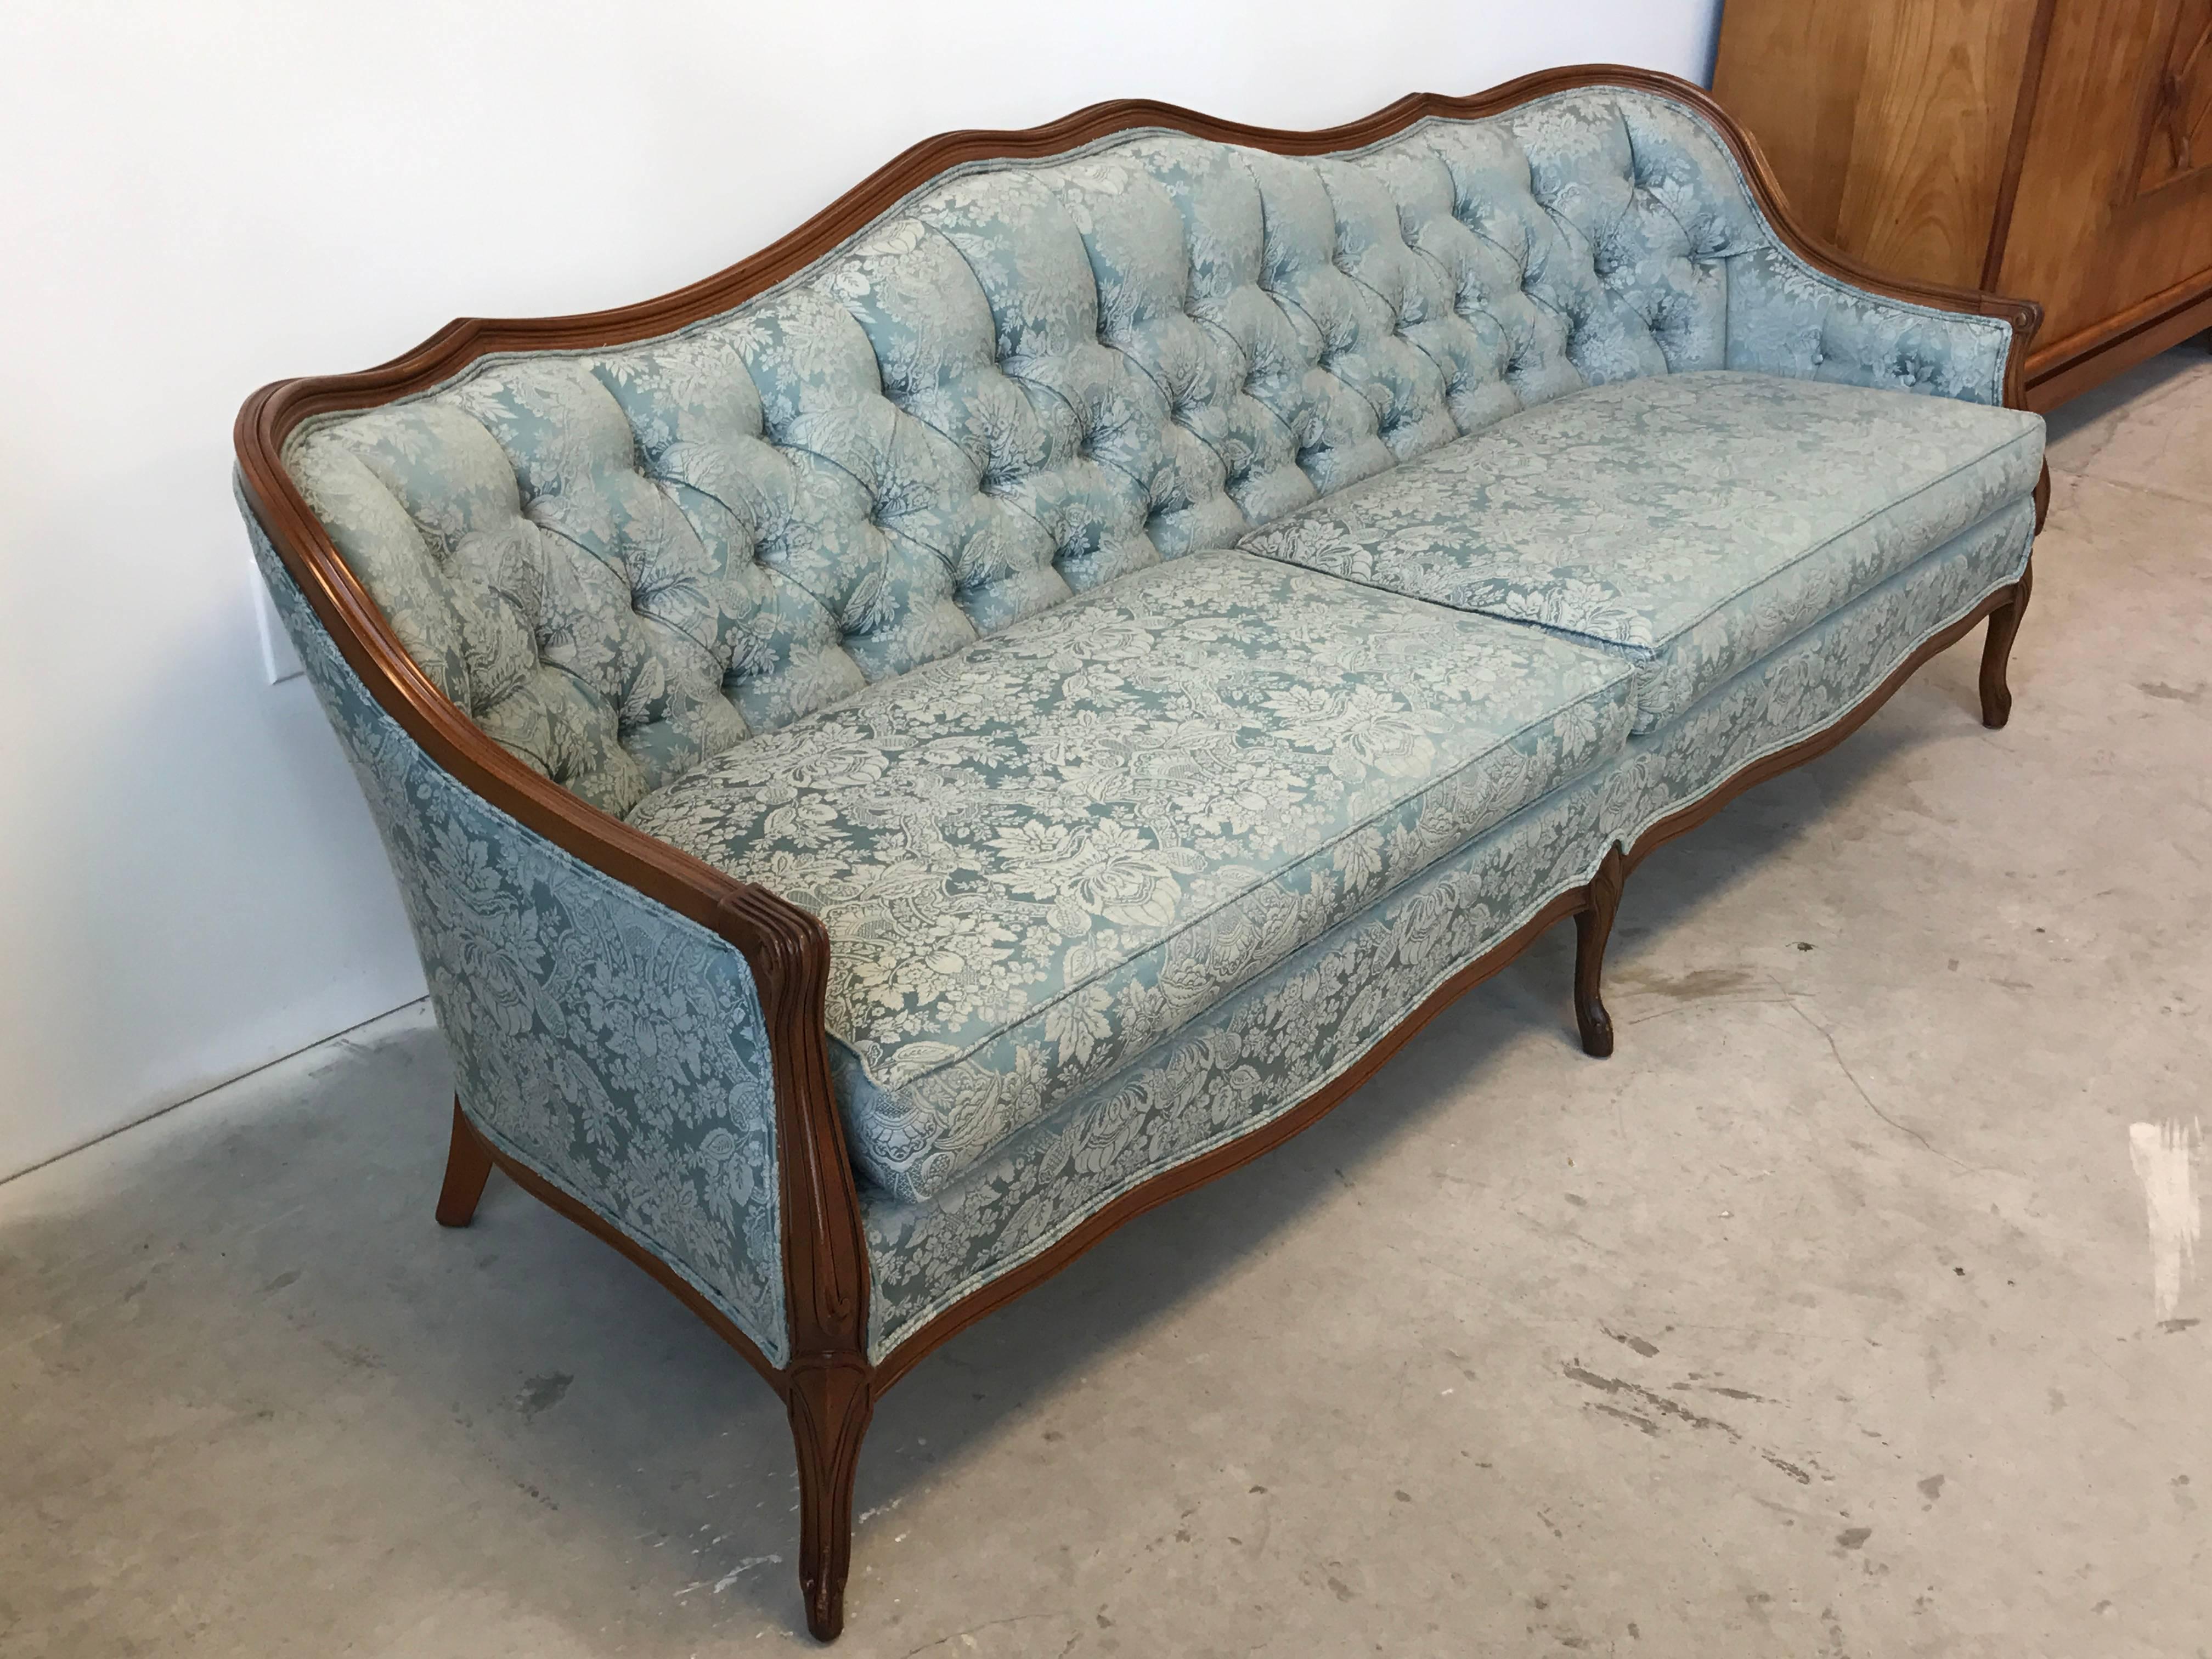 Offered is a beautiful, 1940s French tufted sofa, upholstered in original, blue damask with an oak frame border.